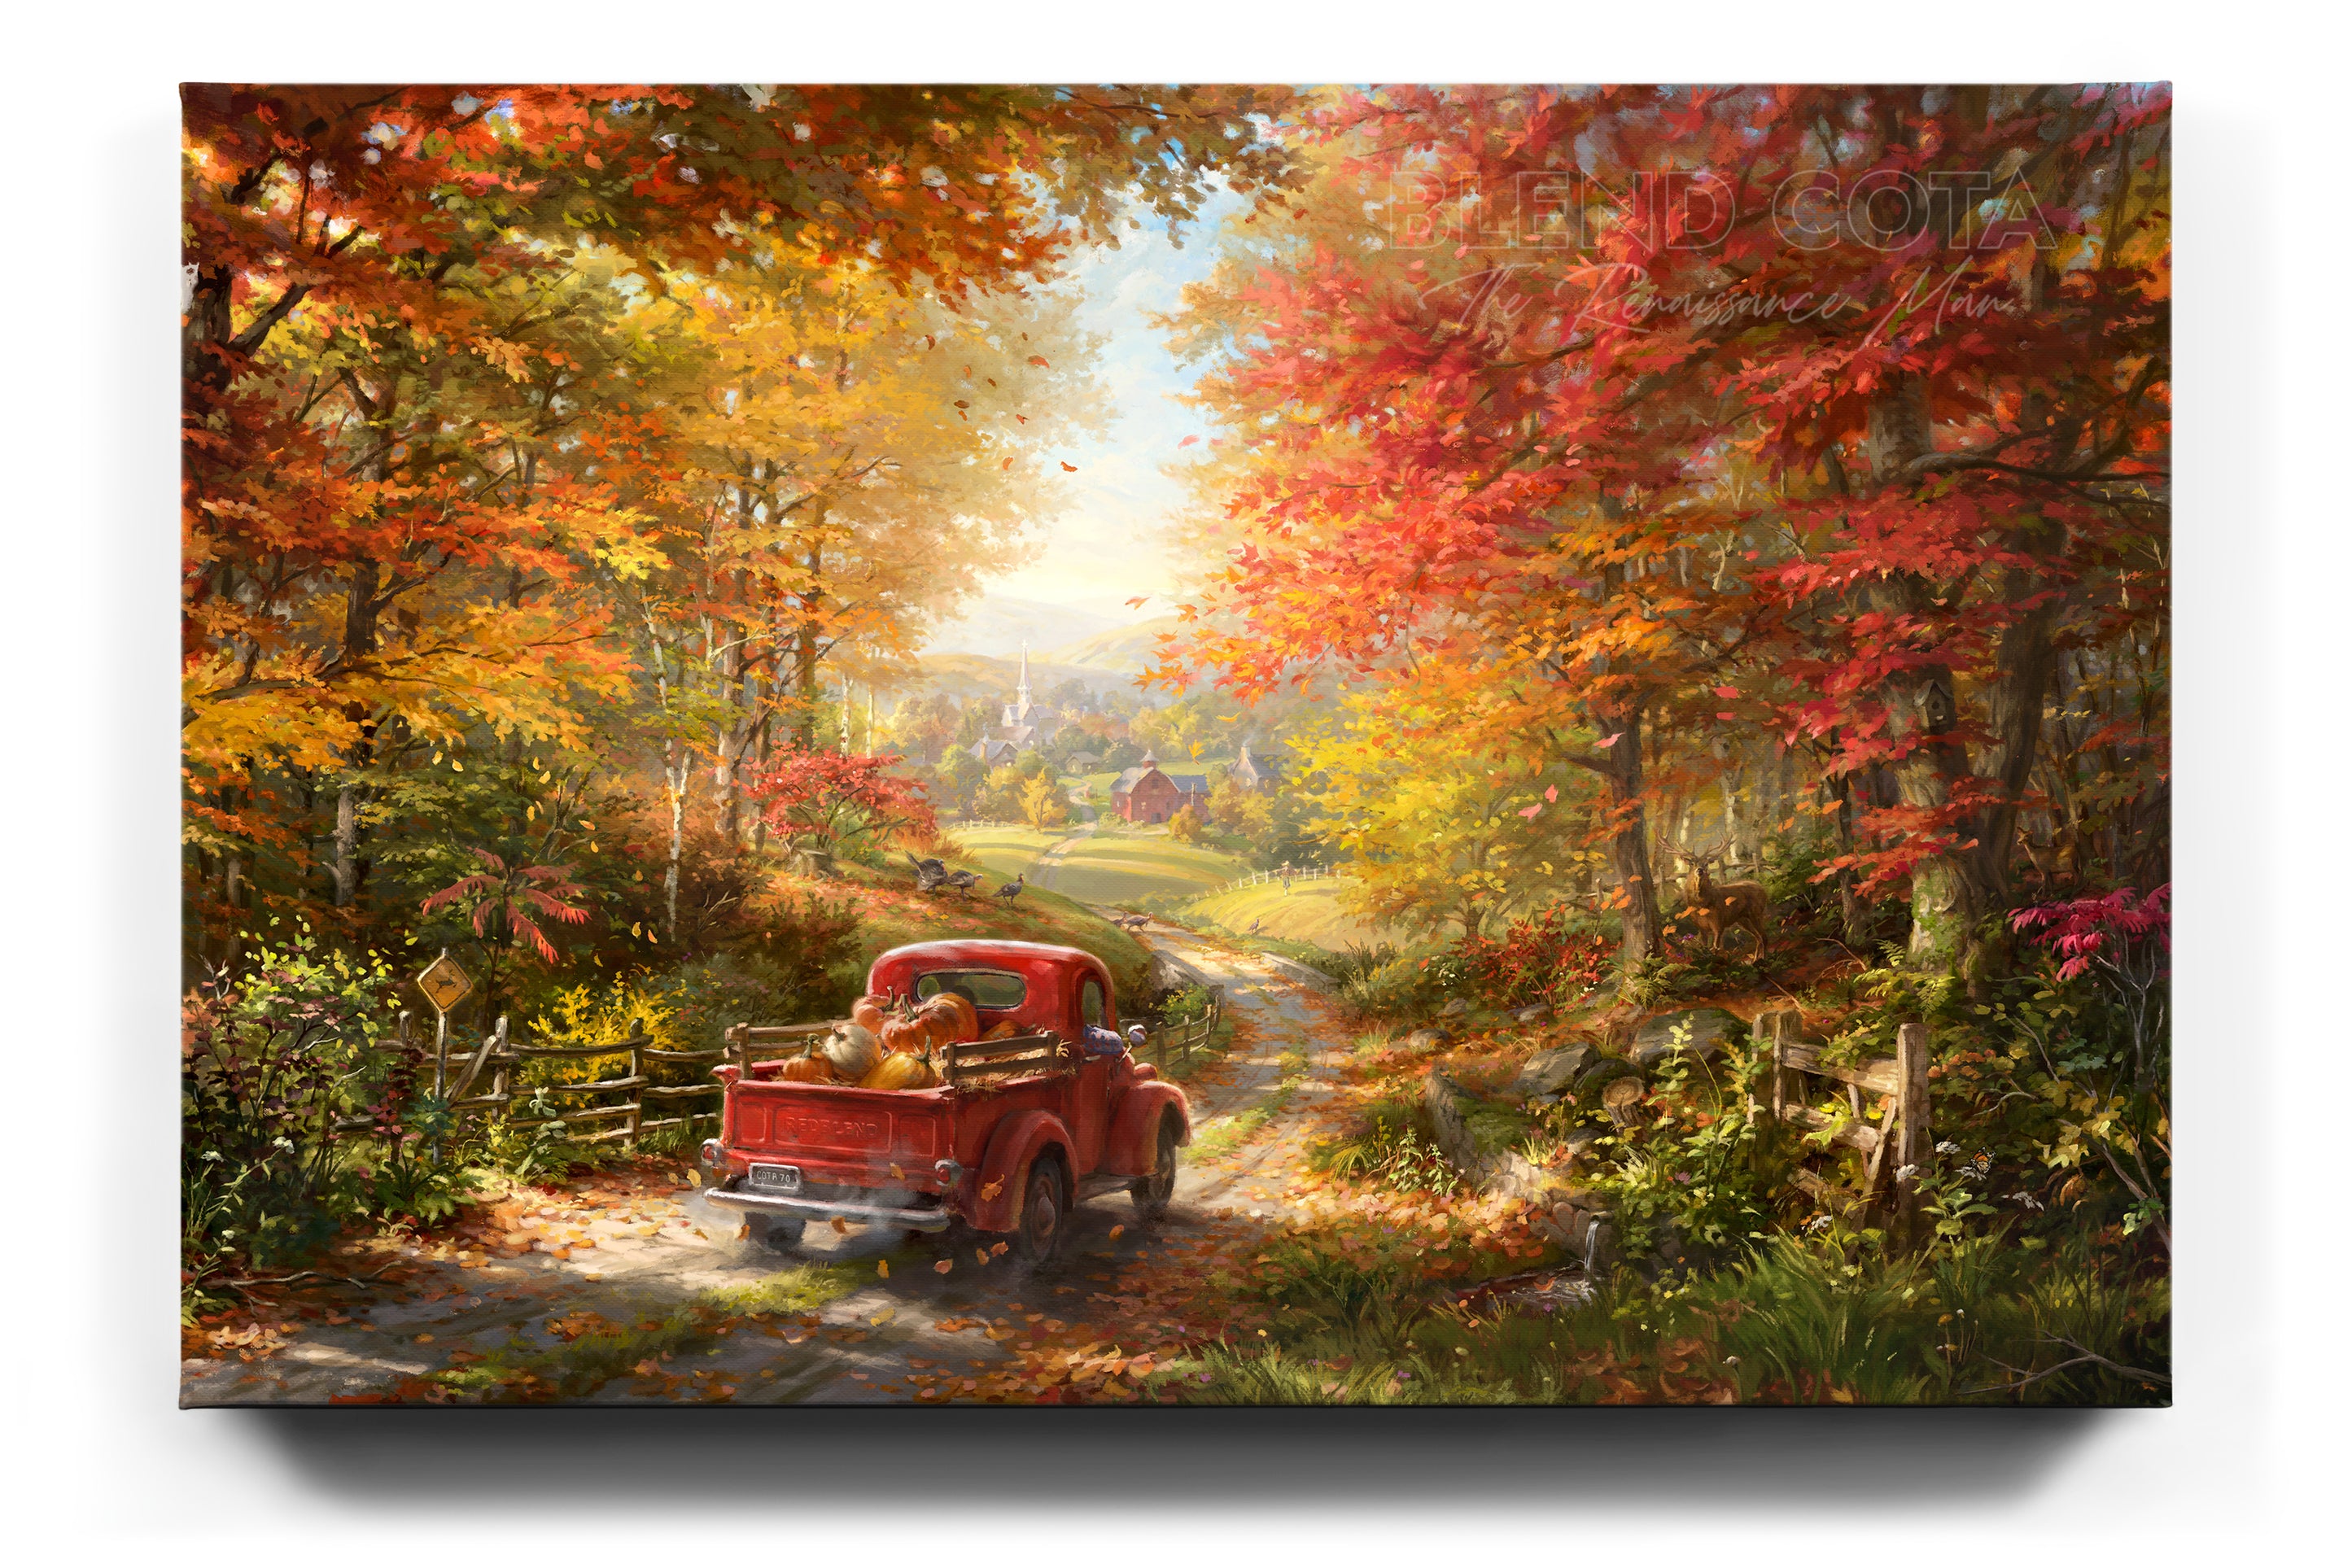 The Place I Belong | Fall Road Autumn Leaves - Blend Cota Limited Edition Art on Canvas - Blend Cota Studios